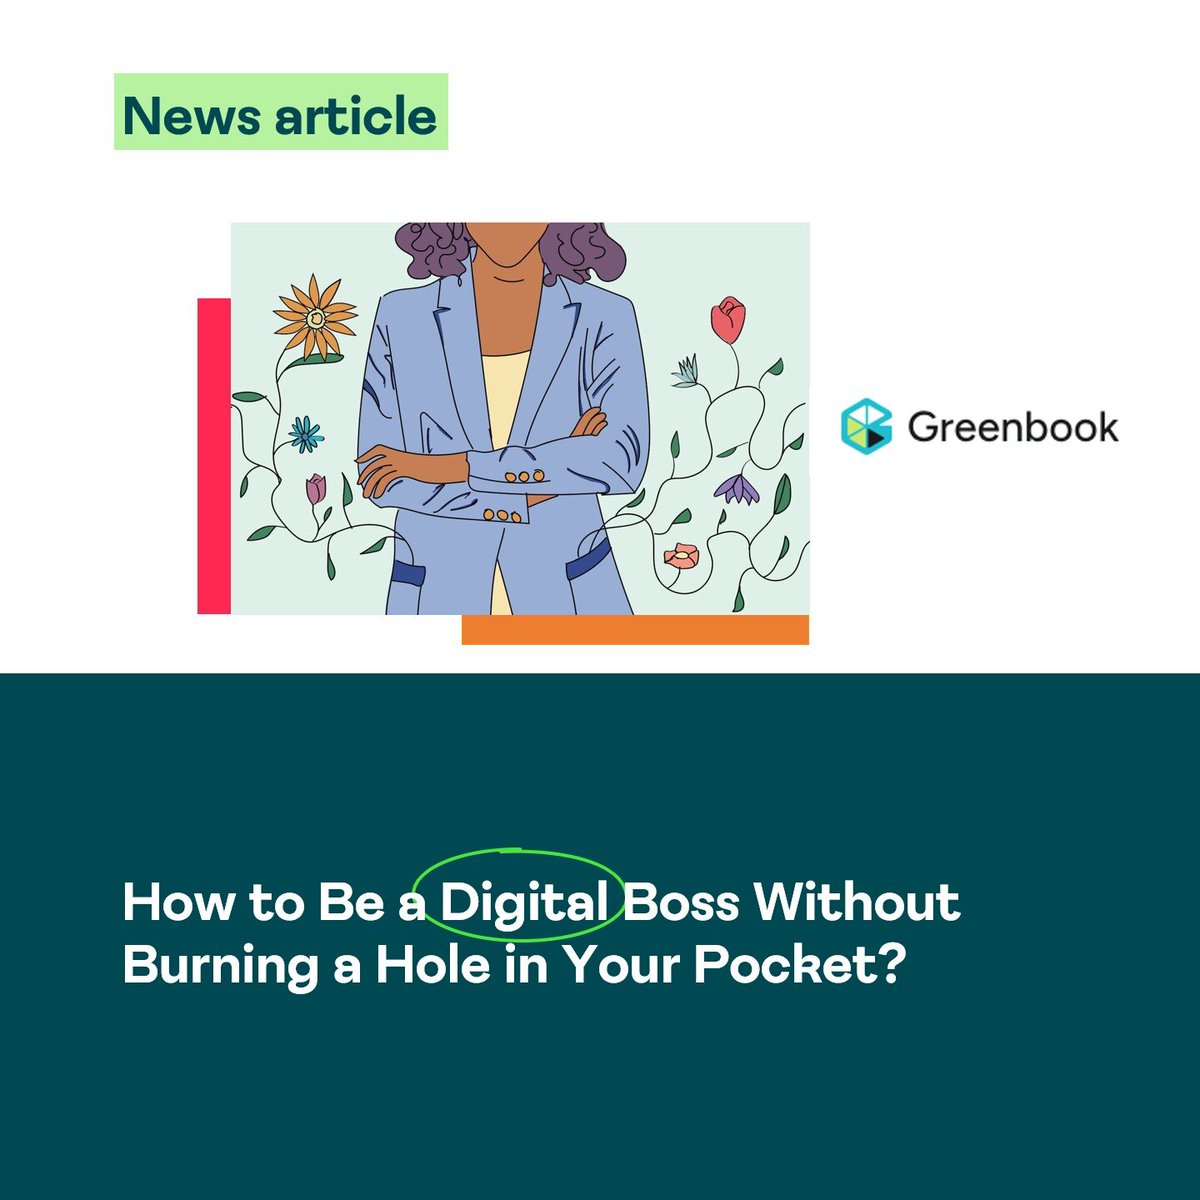 We've had a shoutout in Greenbook! 🎉 Monika Karamchandani, Group Leader at Mondelez International has recommended our eÿeka platform as a top digital tools for consumer research! Check out the article here 👉inspire.wearehuman8.com/3Wbe11G #dowhatmatters #creativecrowdsourcing